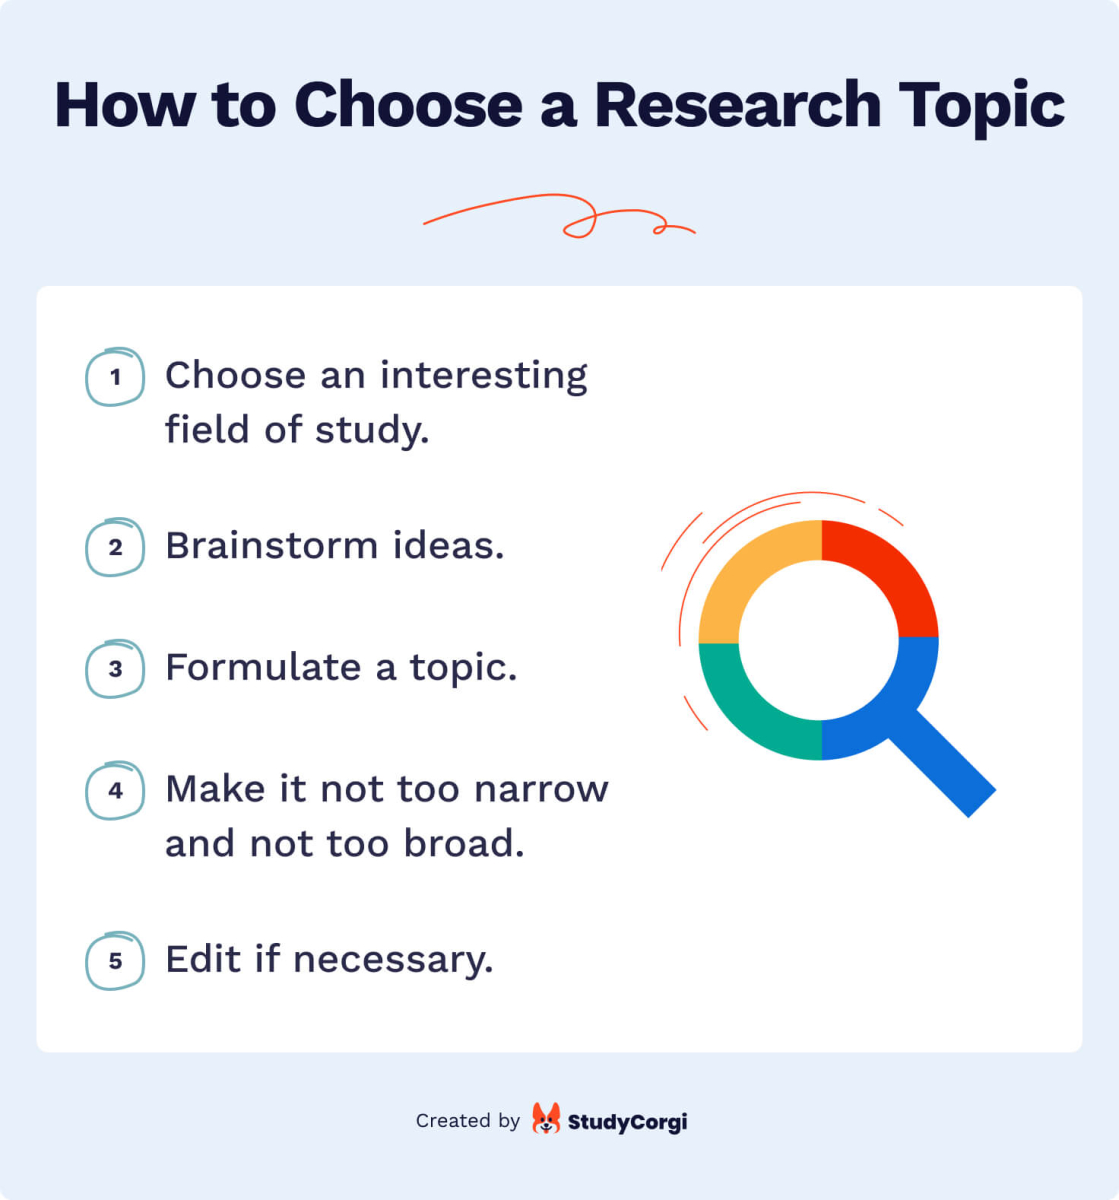 This image shows how to choose a research topics.